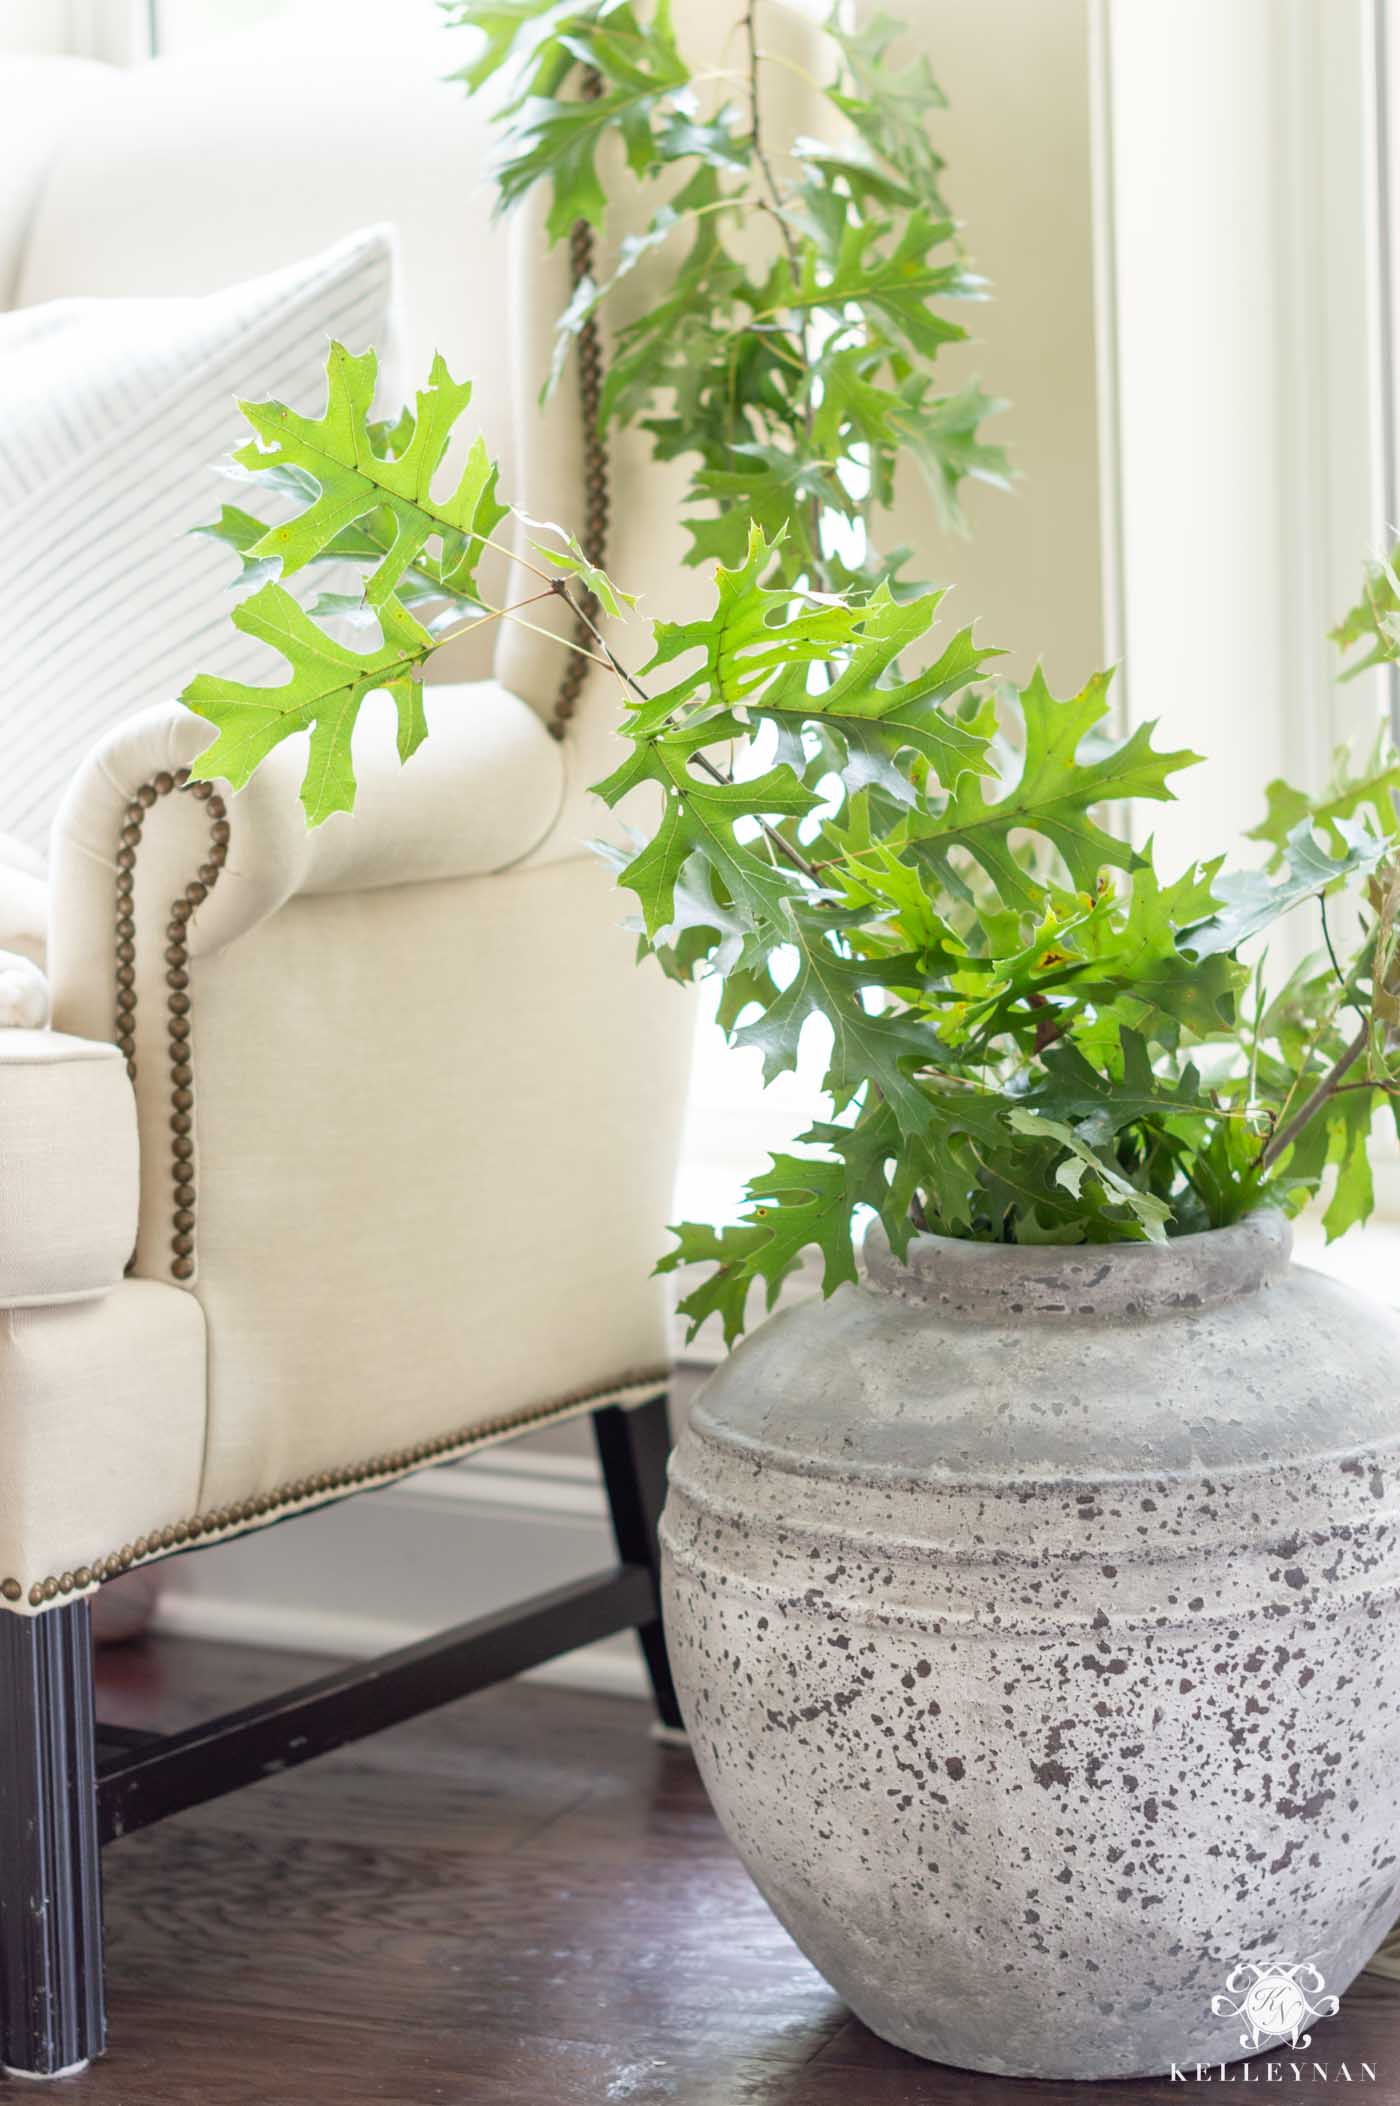 How to Decorate Your Home for Fall with Branches from the Yard